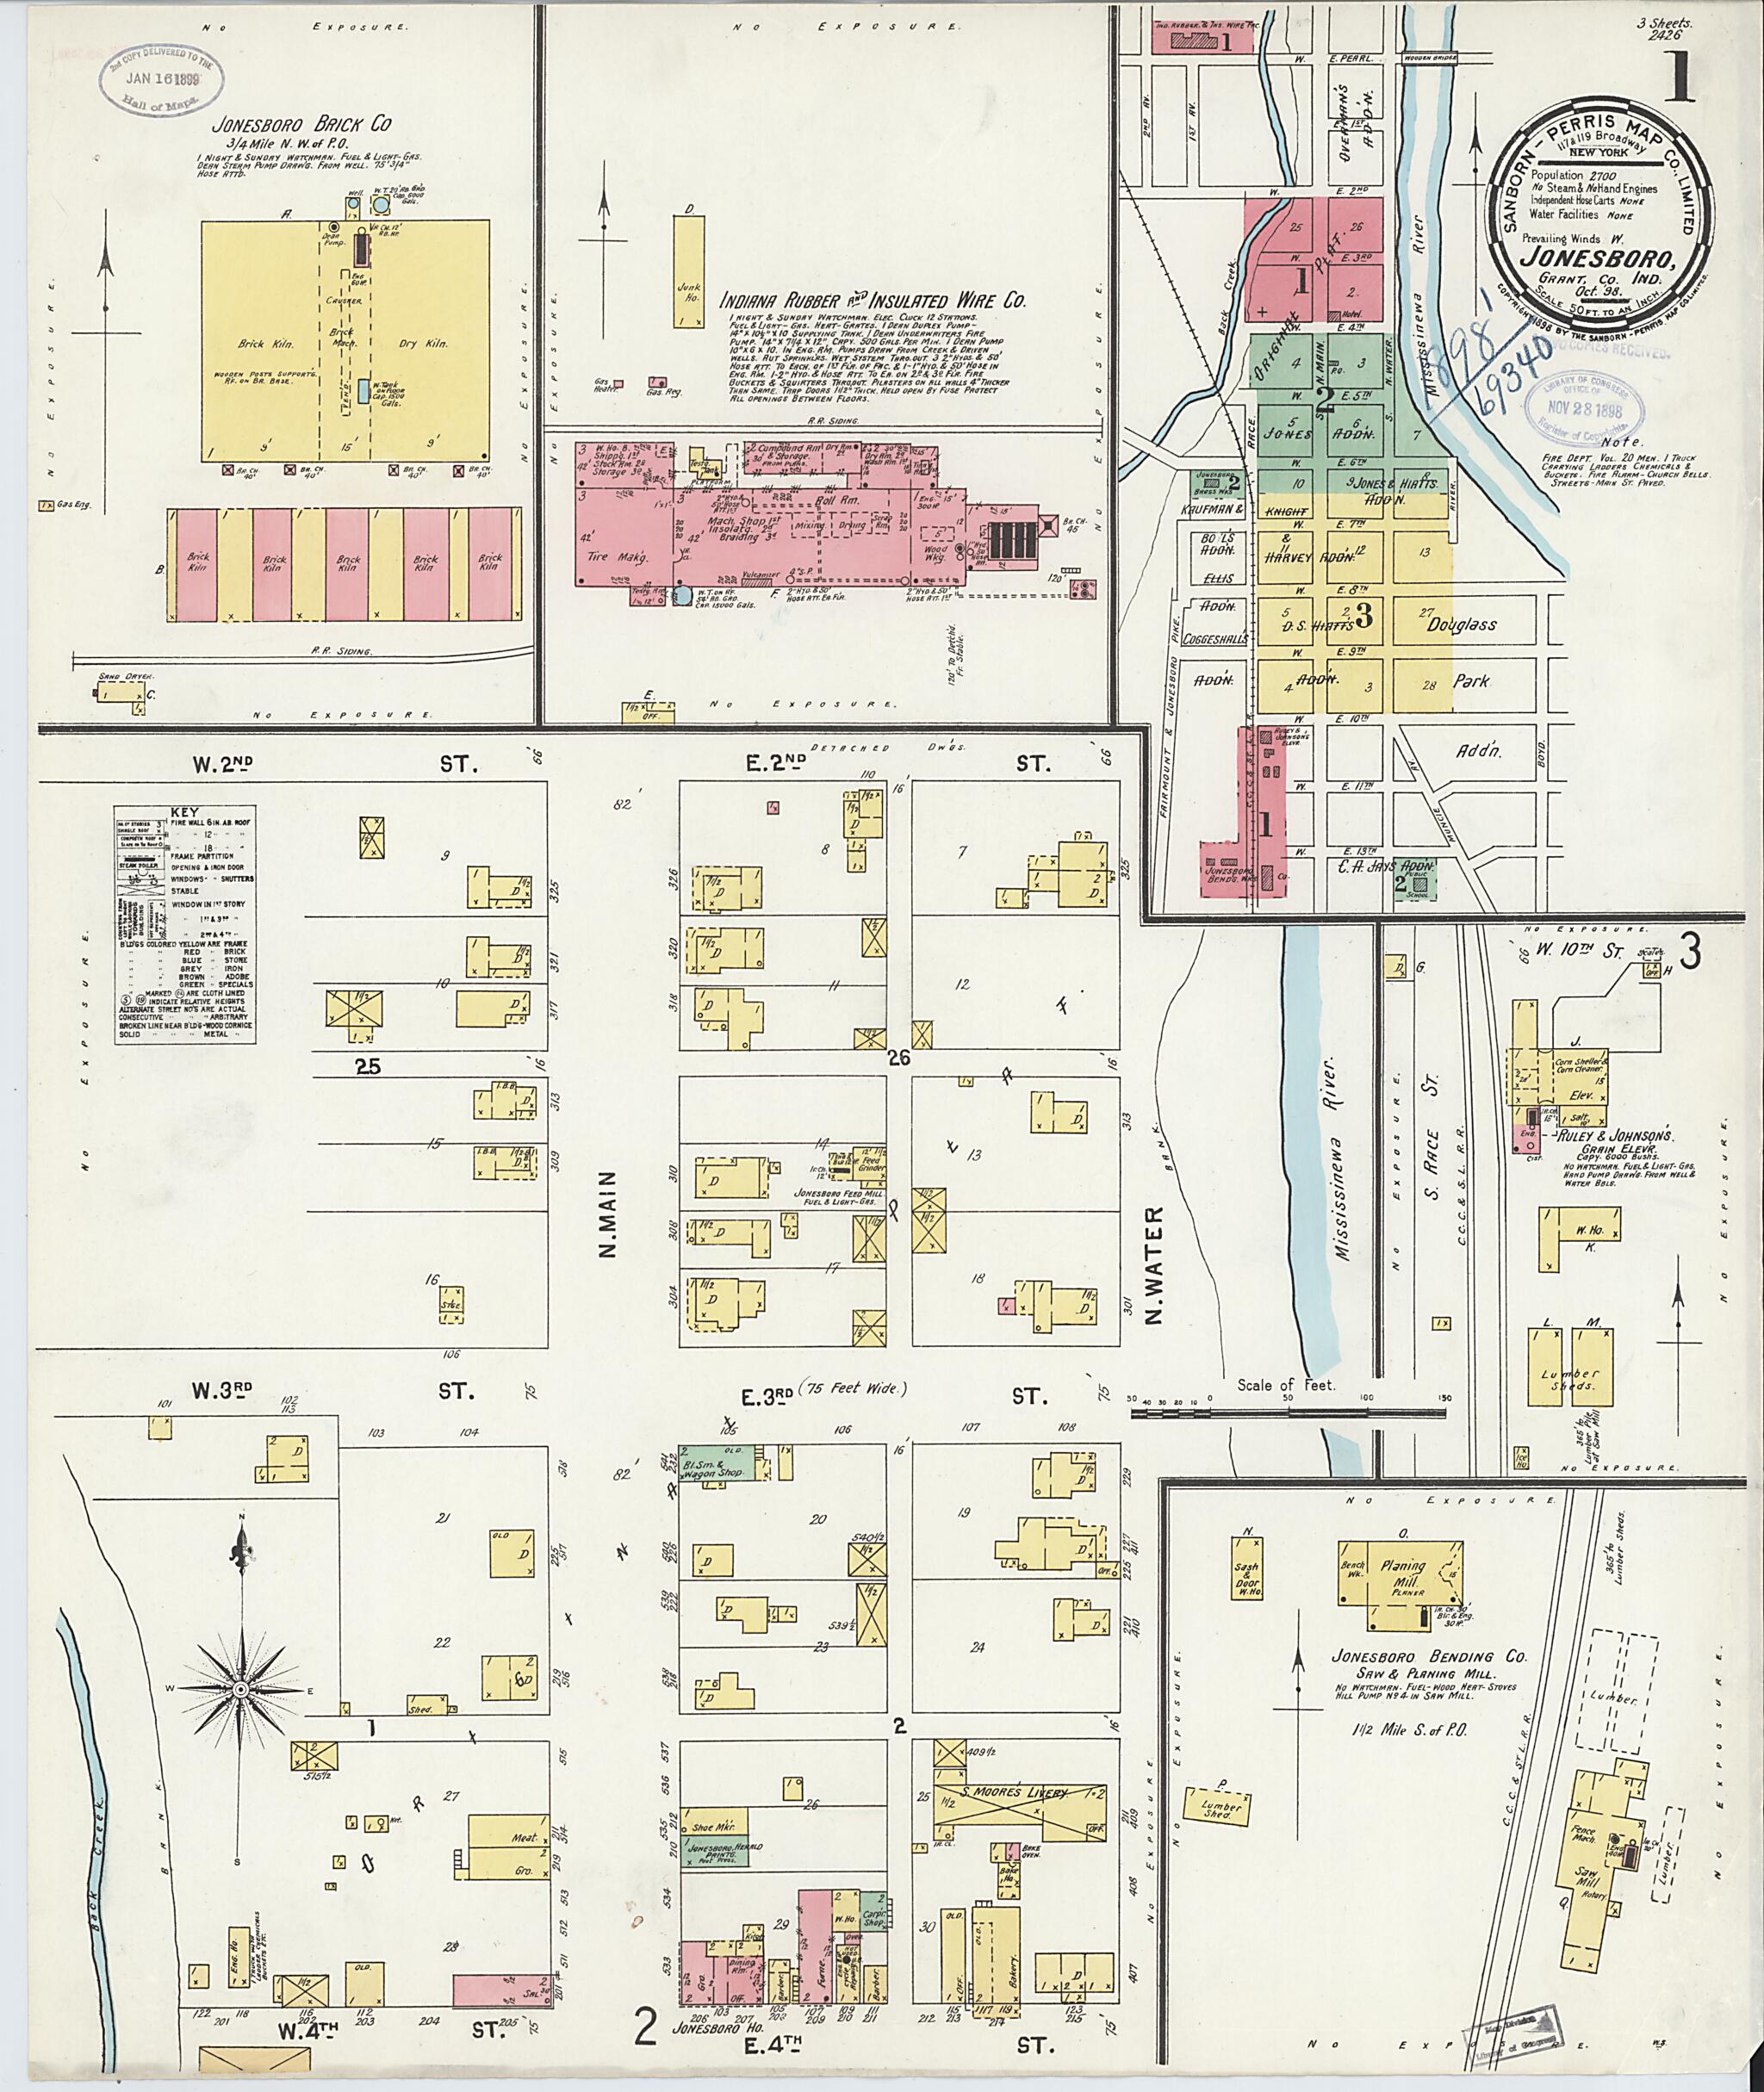 This old map of Jonesboro, Grant County, Indiana was created by Sanborn Map Company in 1898